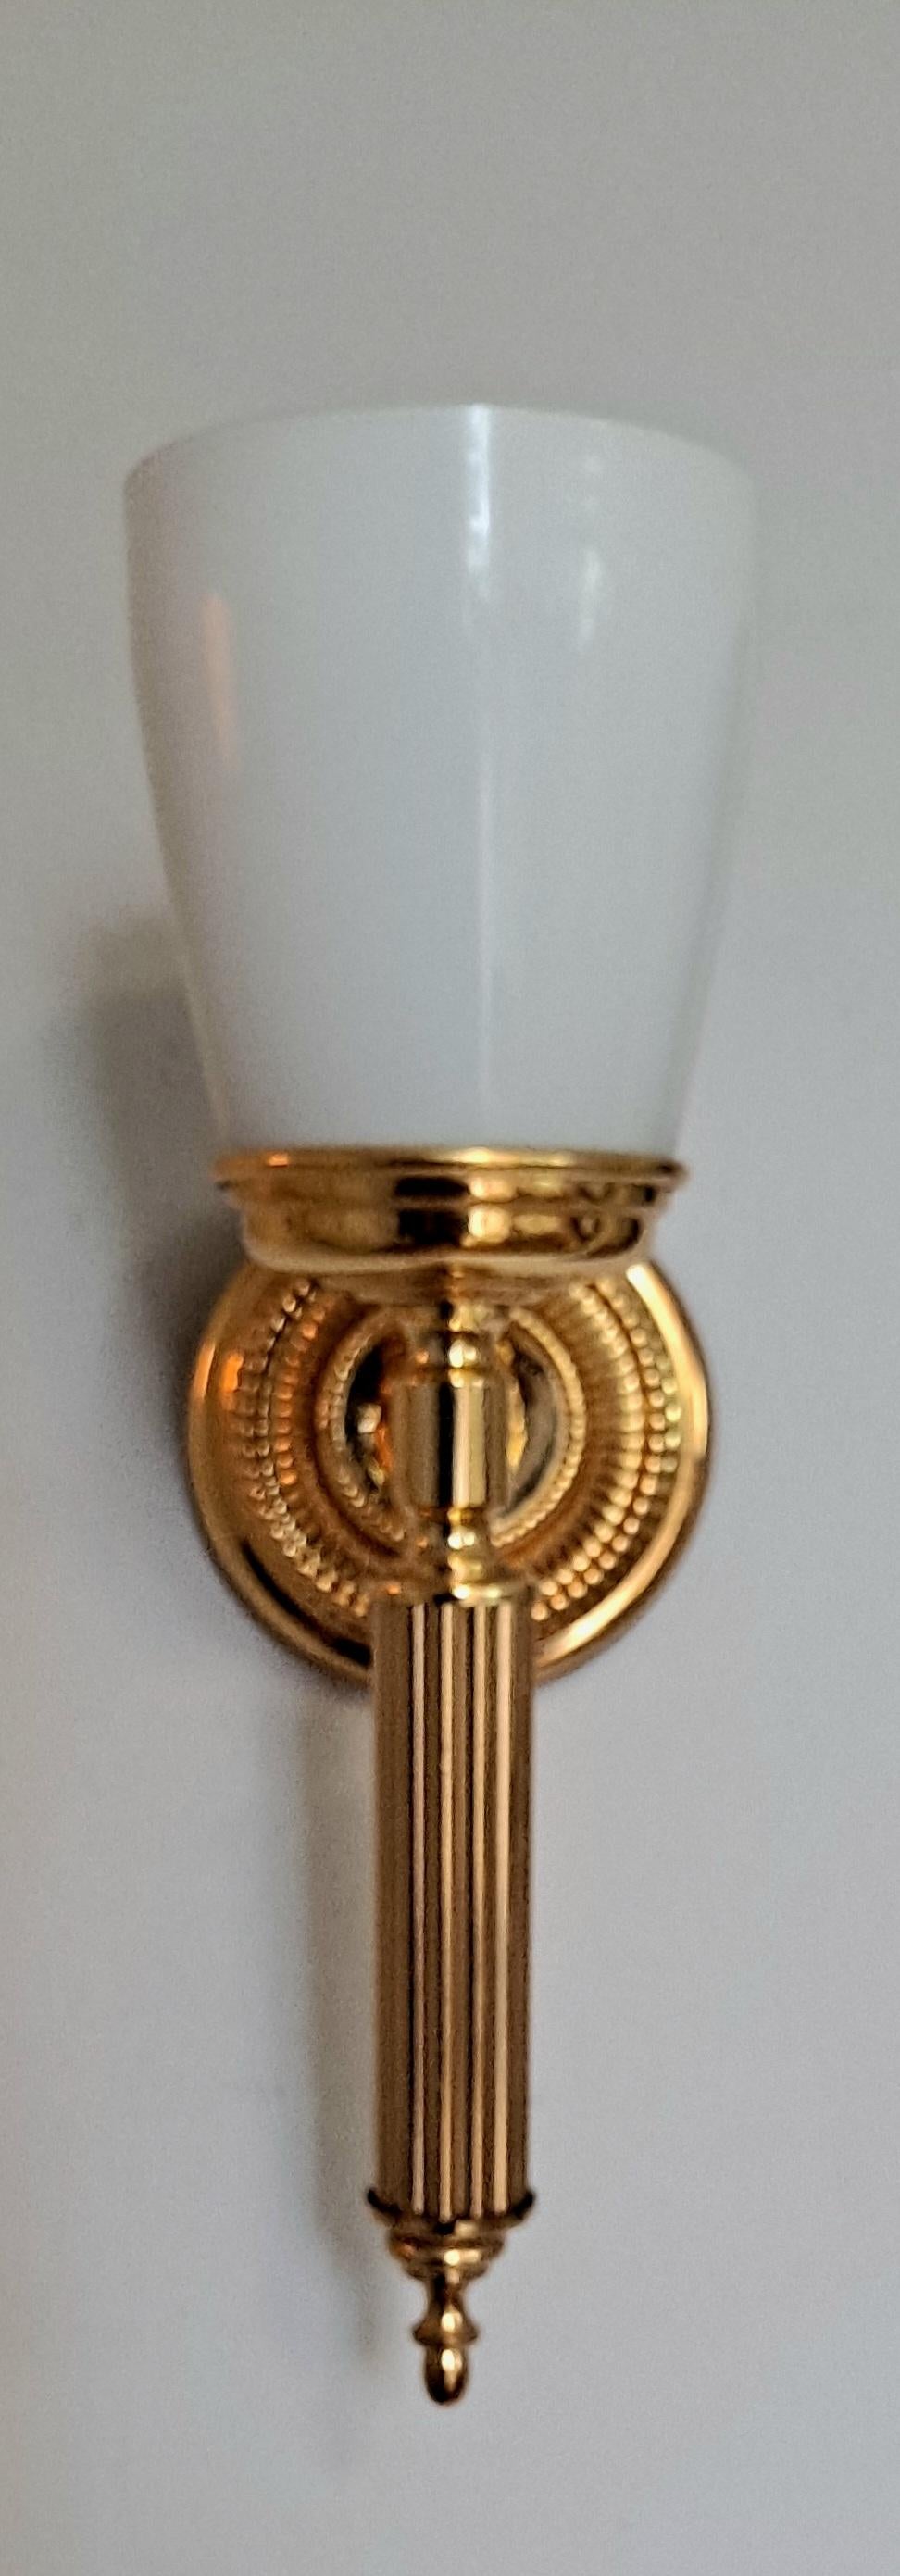 Mid-20th Century Italian Pair of Wall Sconces For Sale